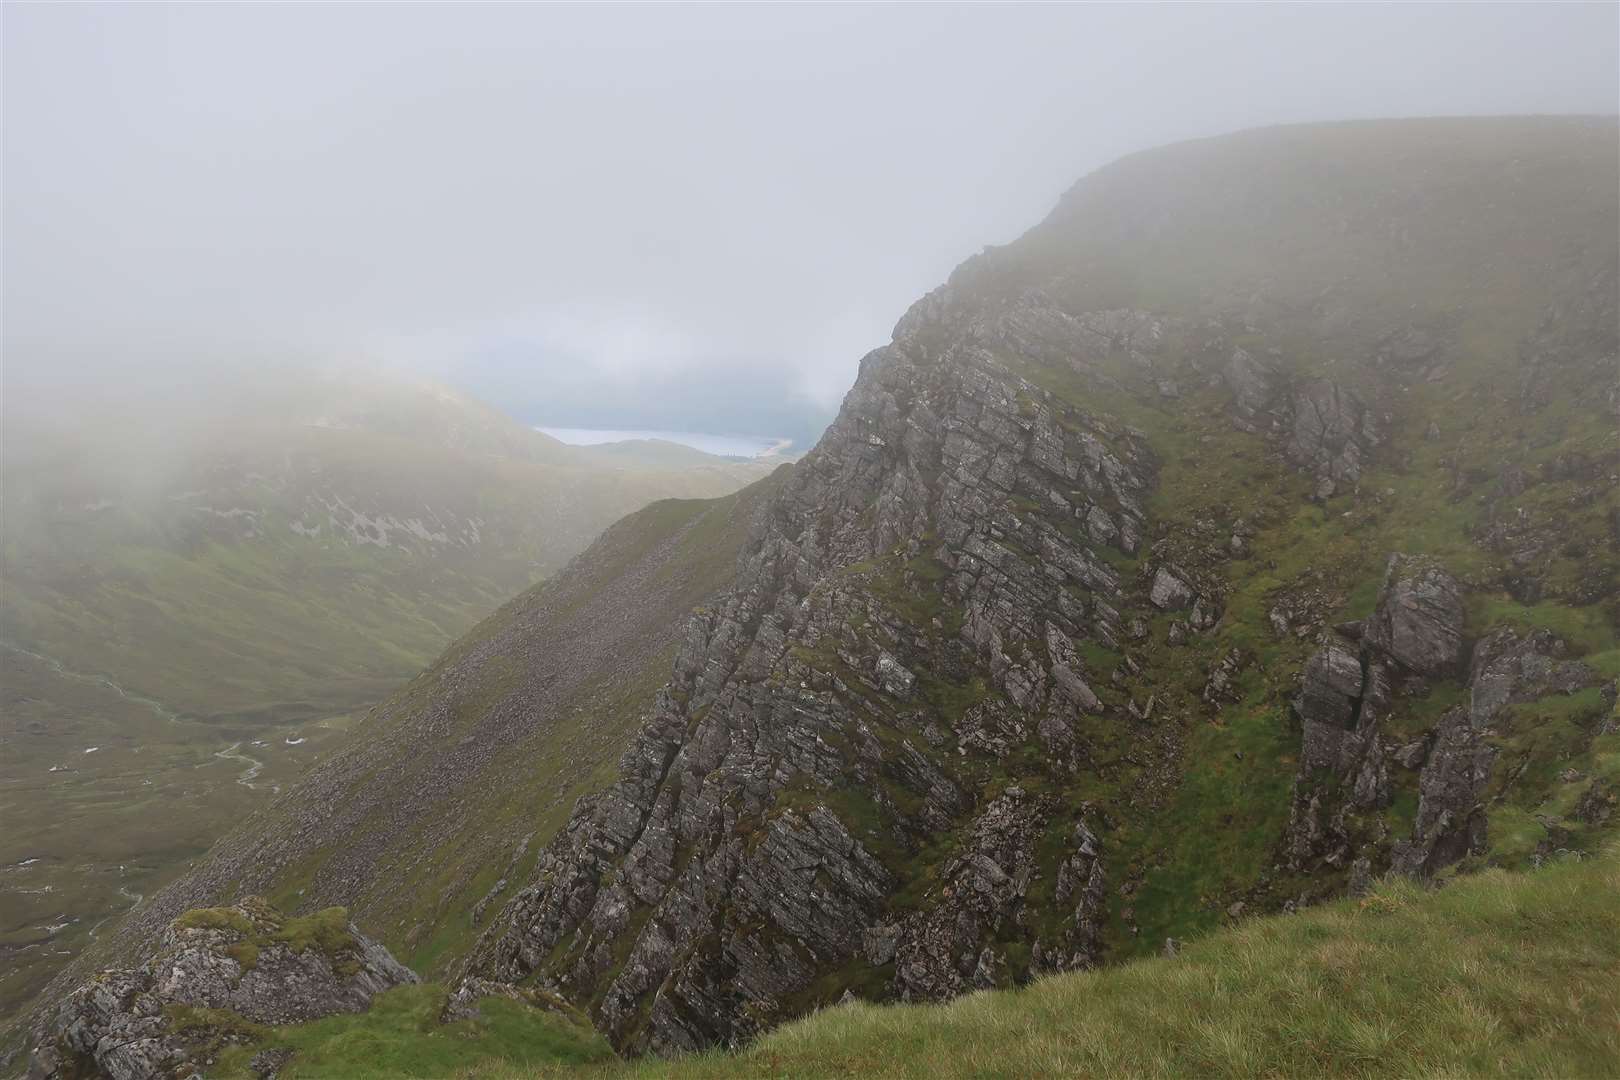 Coire na h-Uamha - the corrie of the caves - is perhaps the most dramatic feature of Beinn a'Chaorainn.